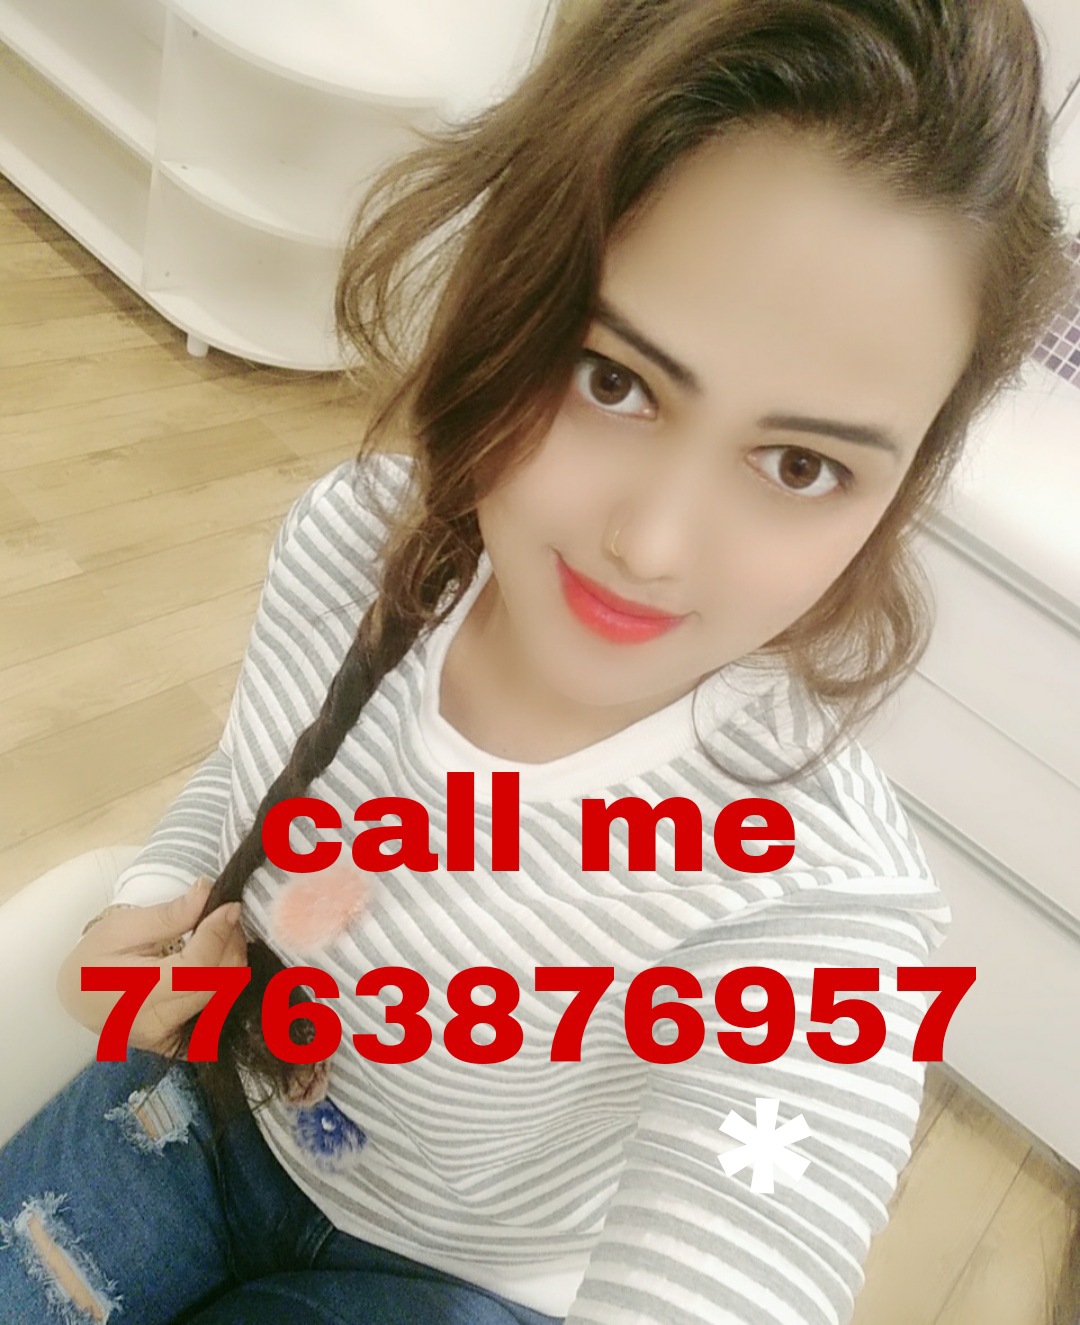 BARDHAMAN CALL GIRL LOW PRICE CASH PAYMENT SERVICE AVAILABLE 